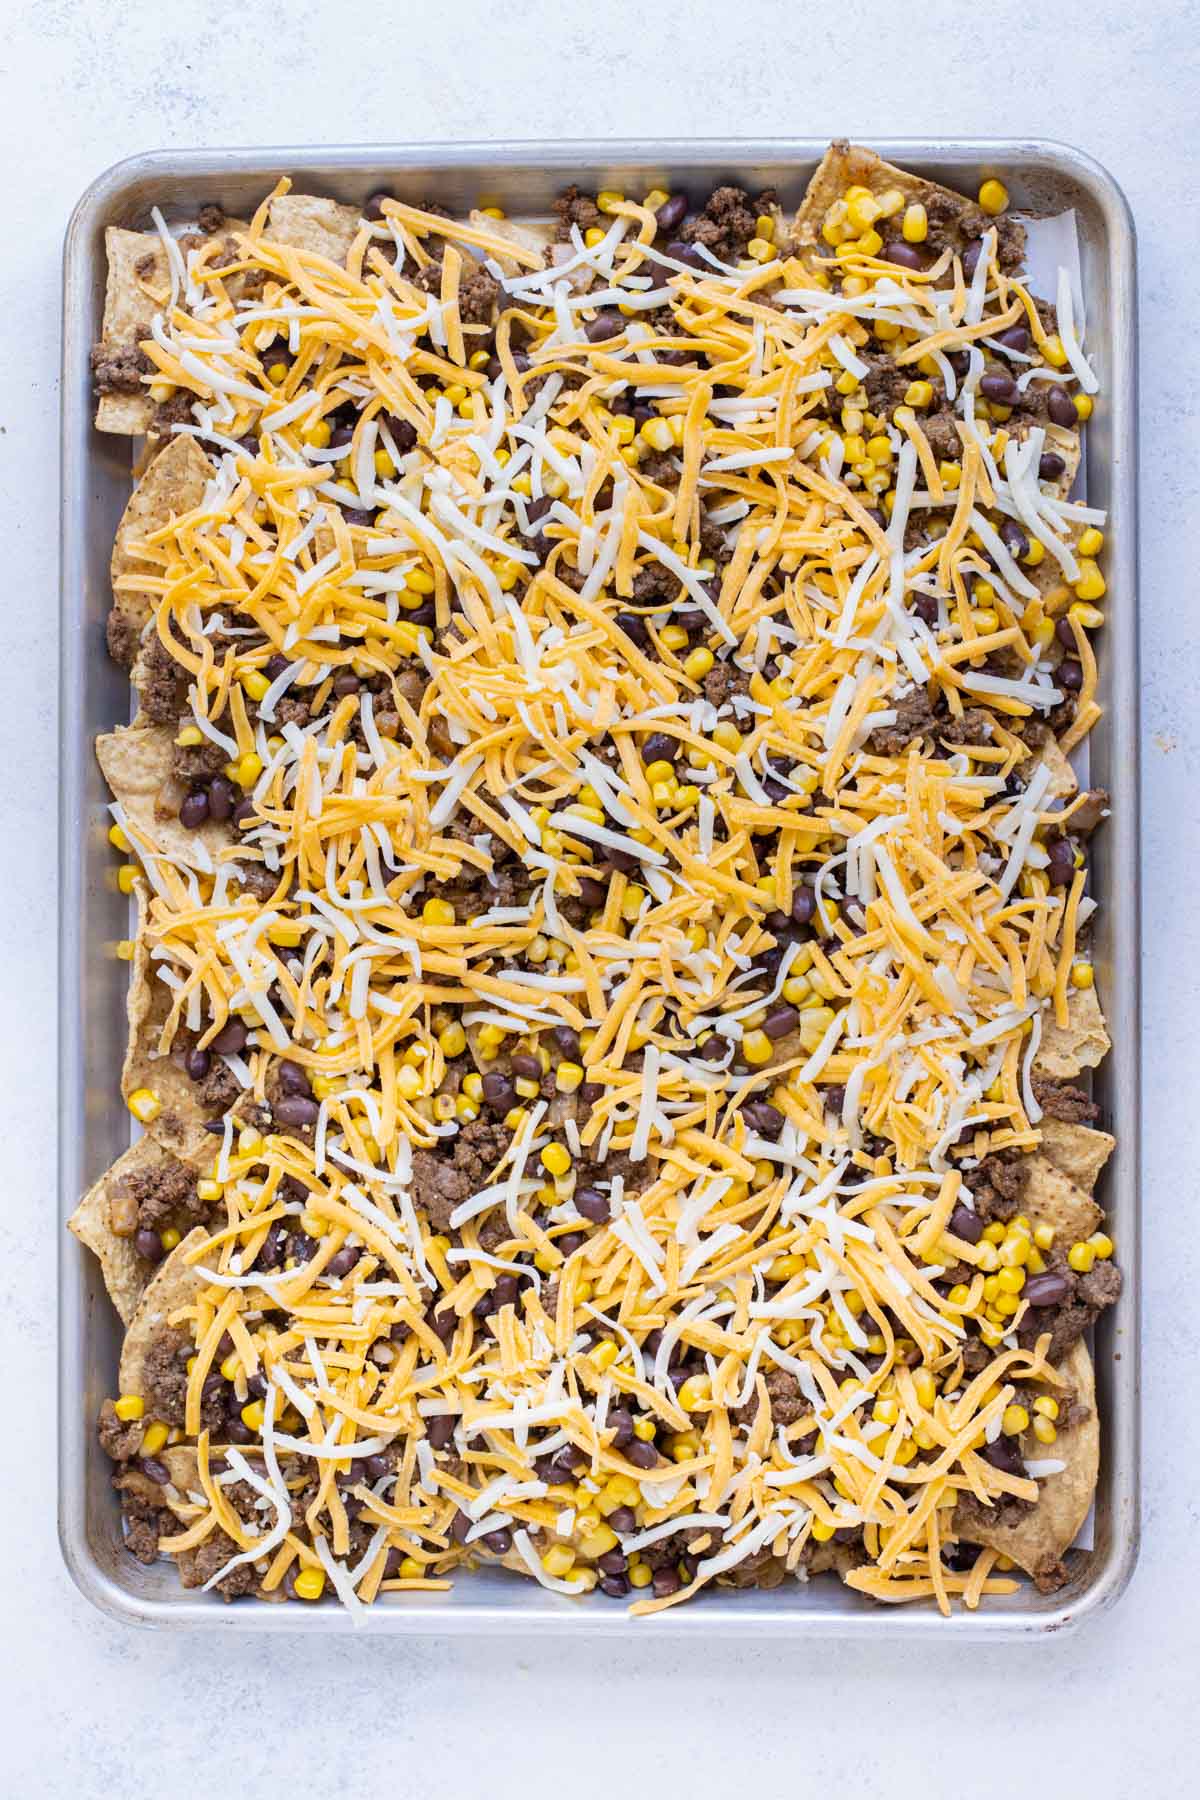 Cheese is sprinkled over the chips, beef, beans, and corn.